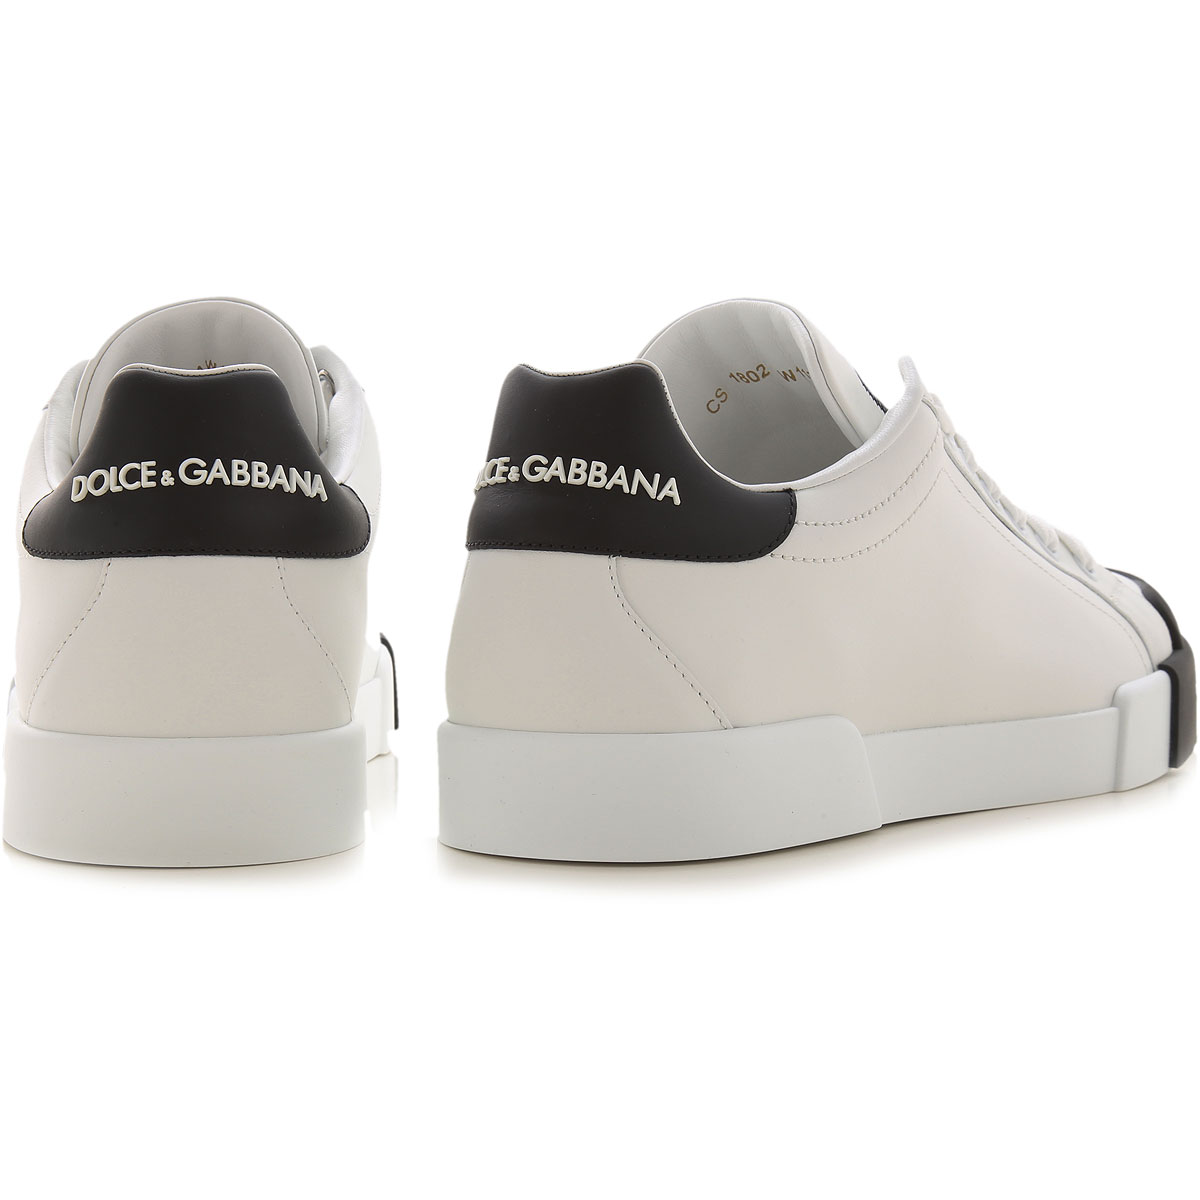 Mens Shoes Dolce & Gabbana, Style code: cs1802-aw113-89697